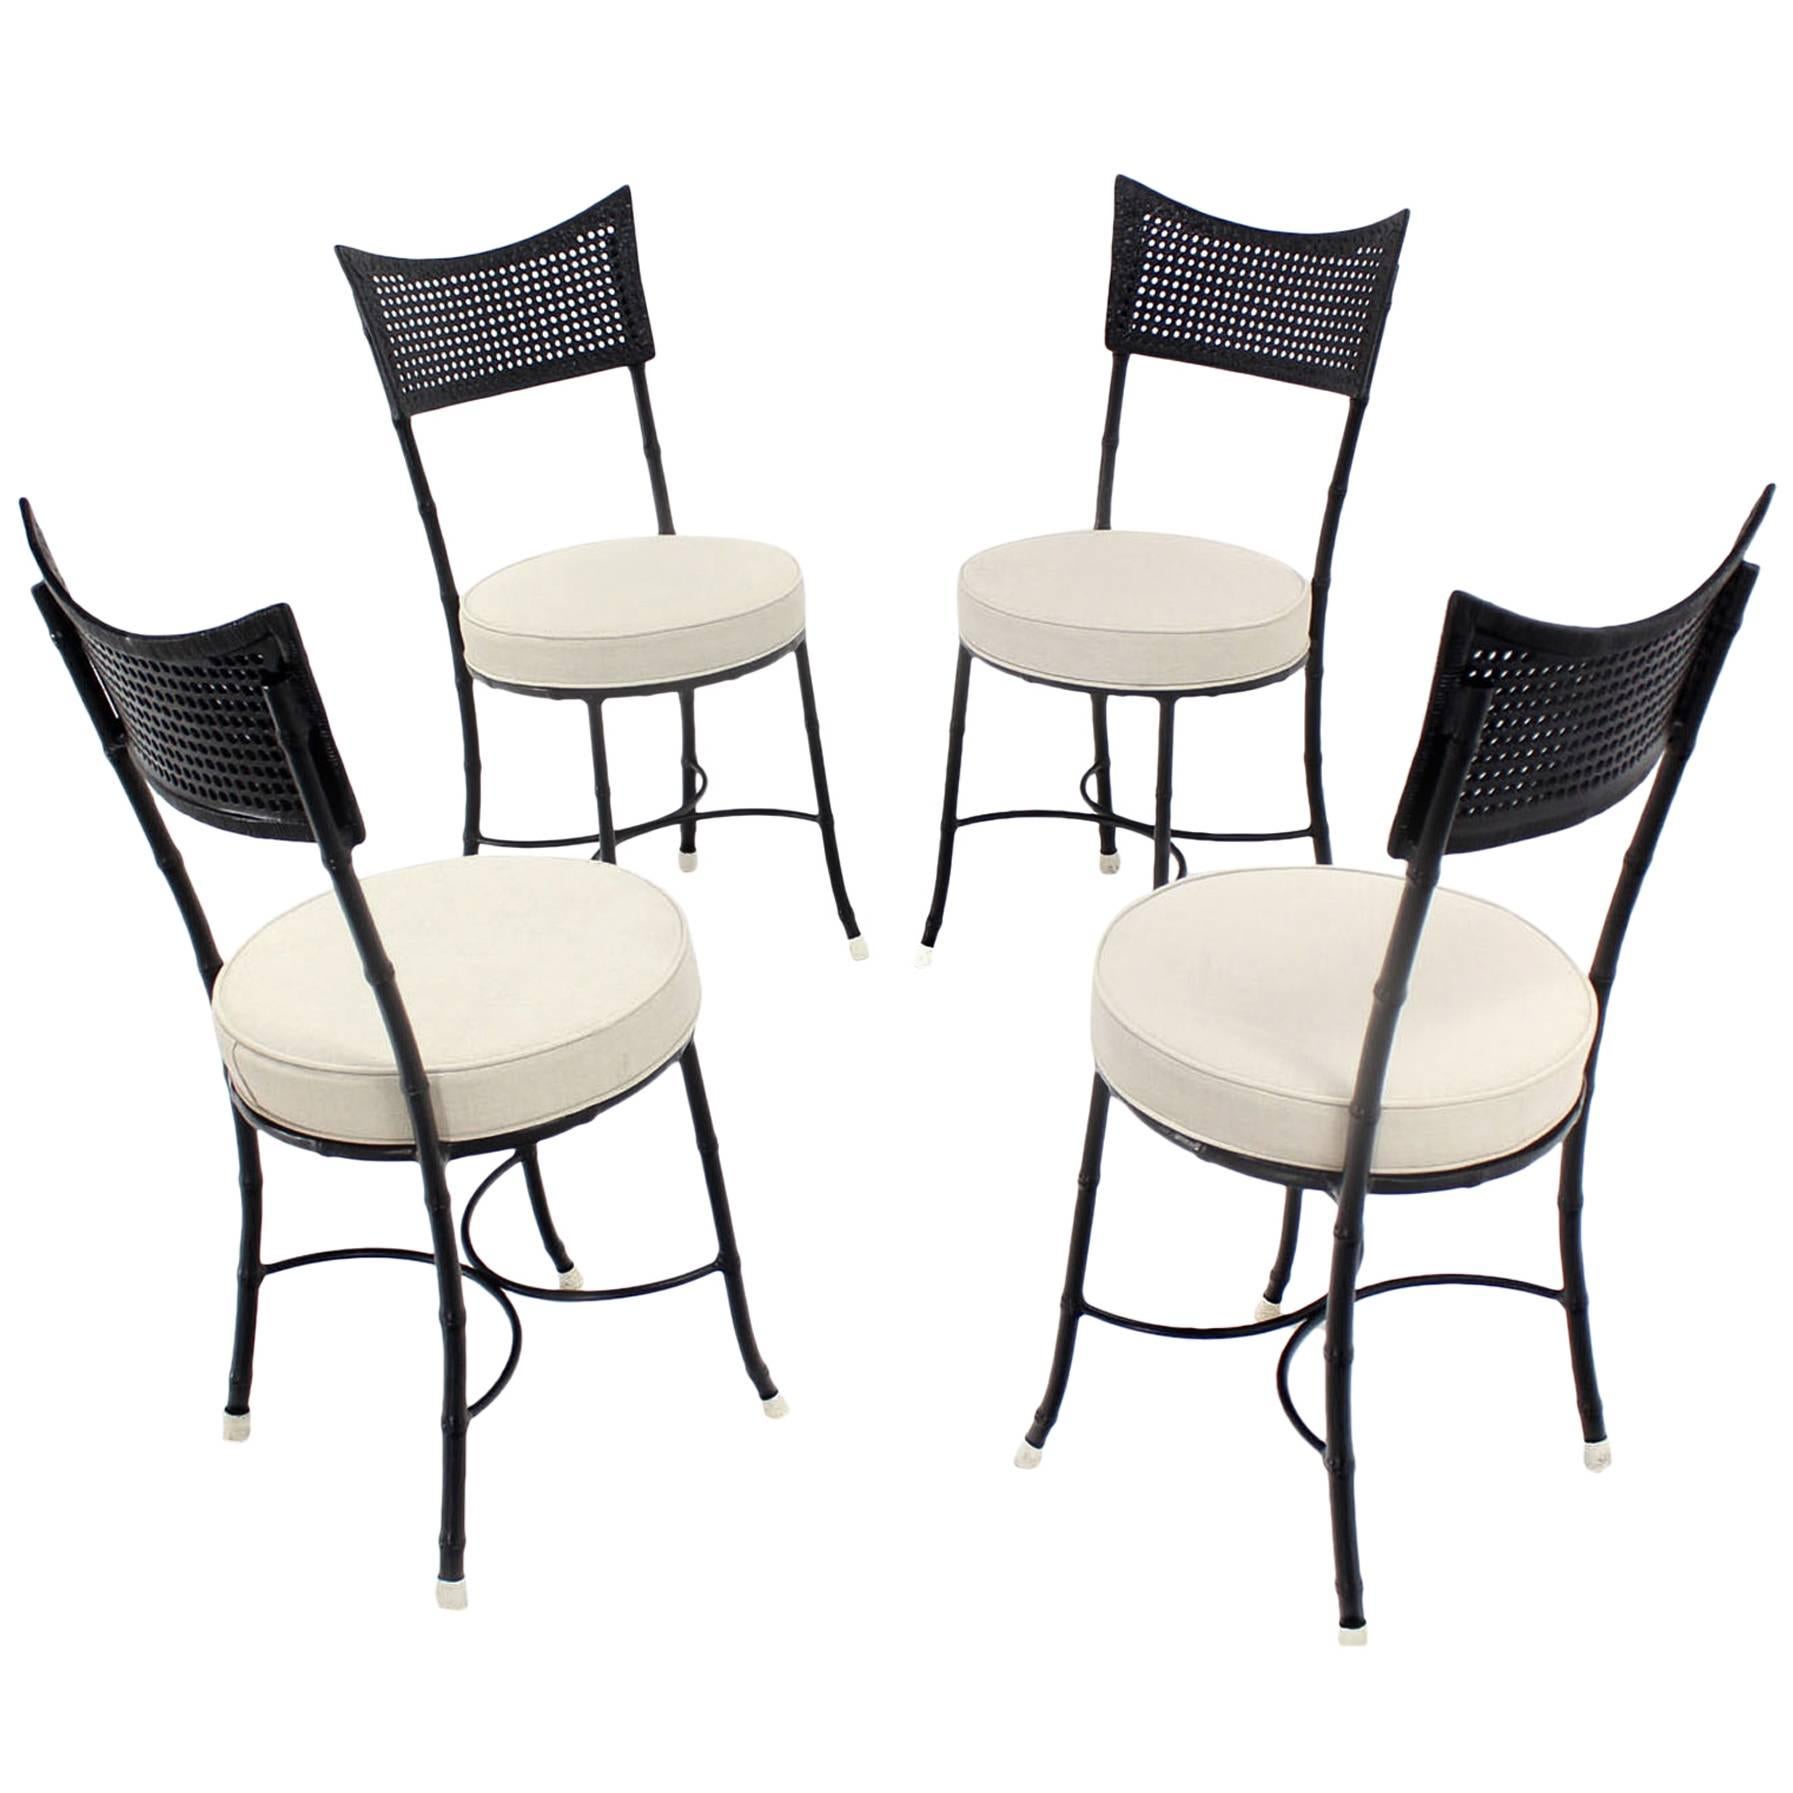 Four Cast Aluminum Faux Bamboo and Cane Round Seat Chairs